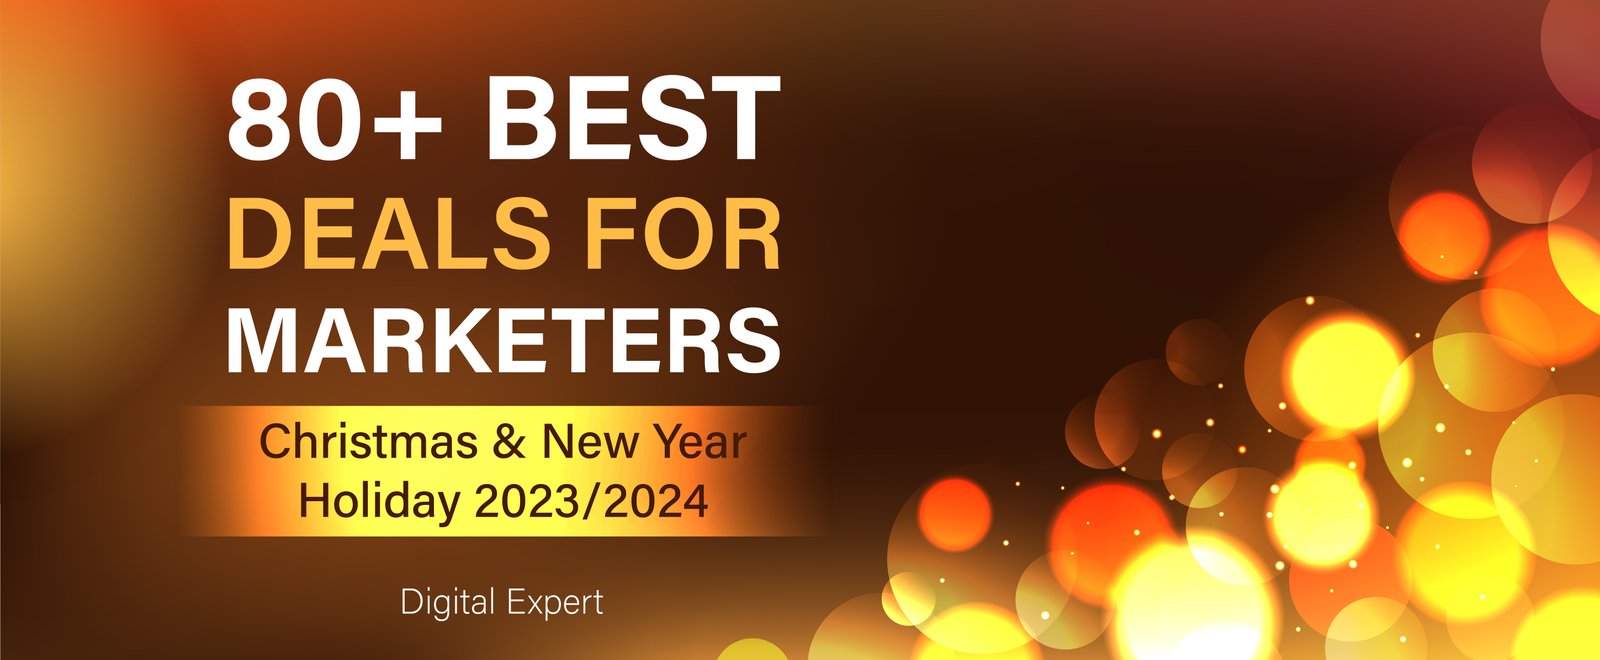 80+ Christmas & New Year Holiday Deals for Marketers 2023/2024